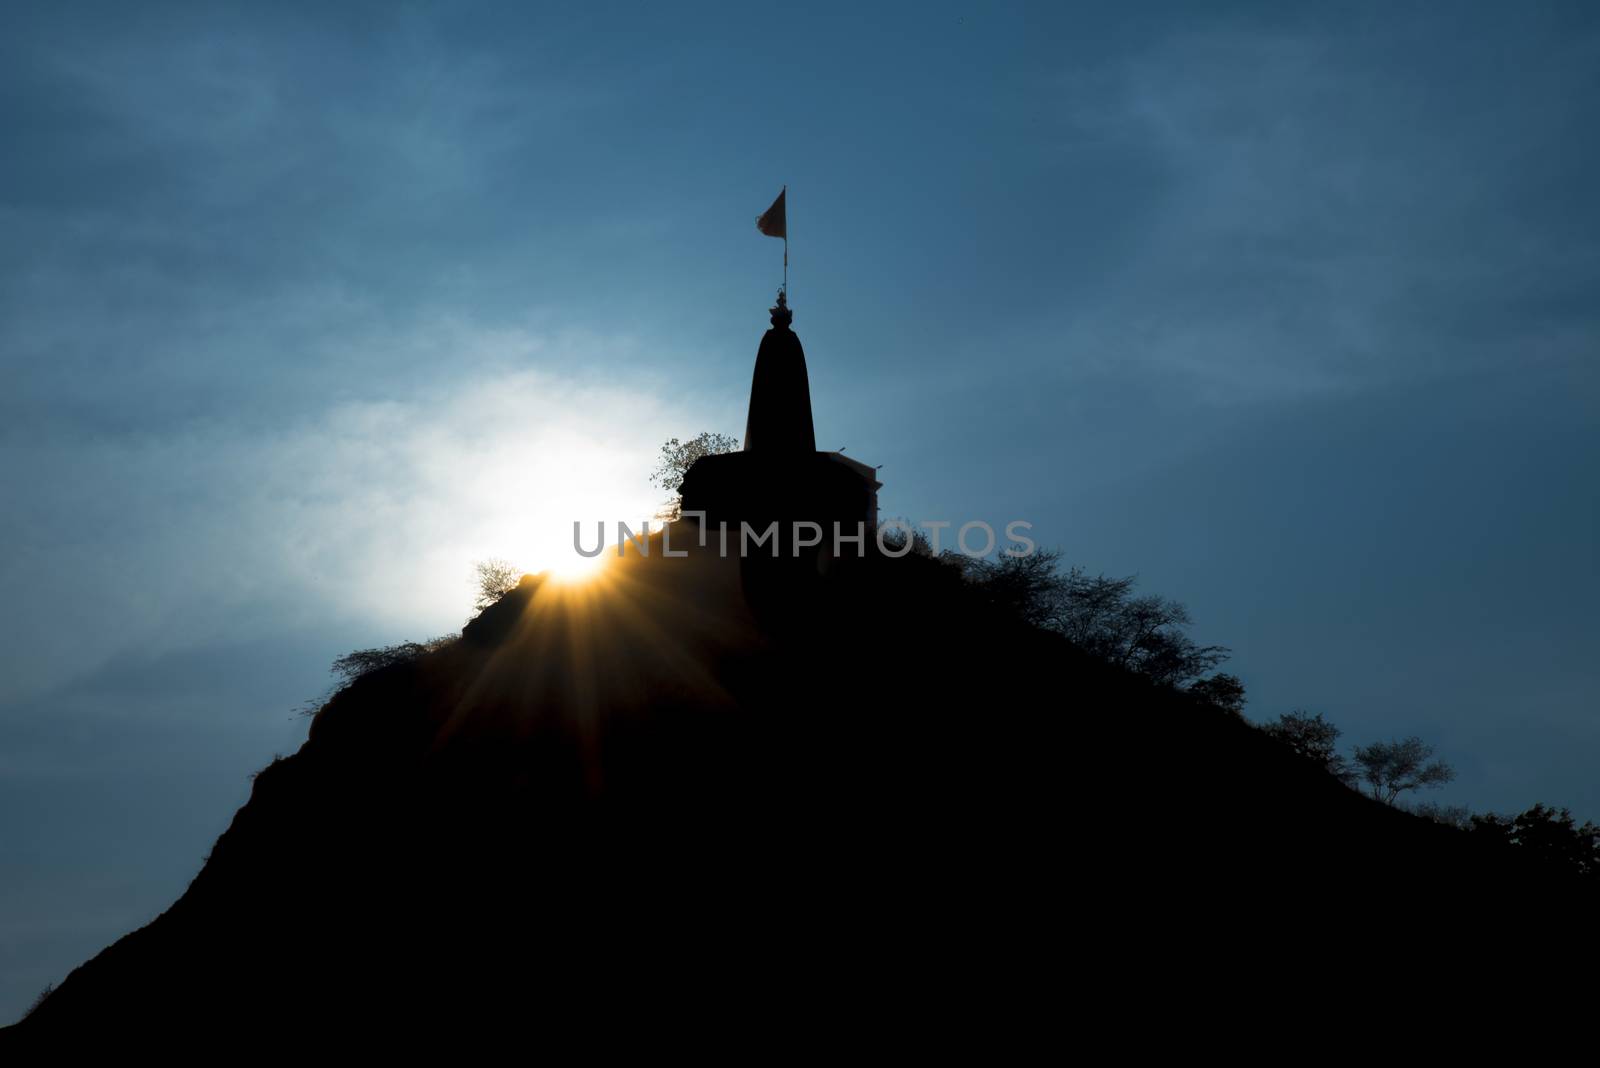 Sun setting over a hill temple in Rajasthan India
